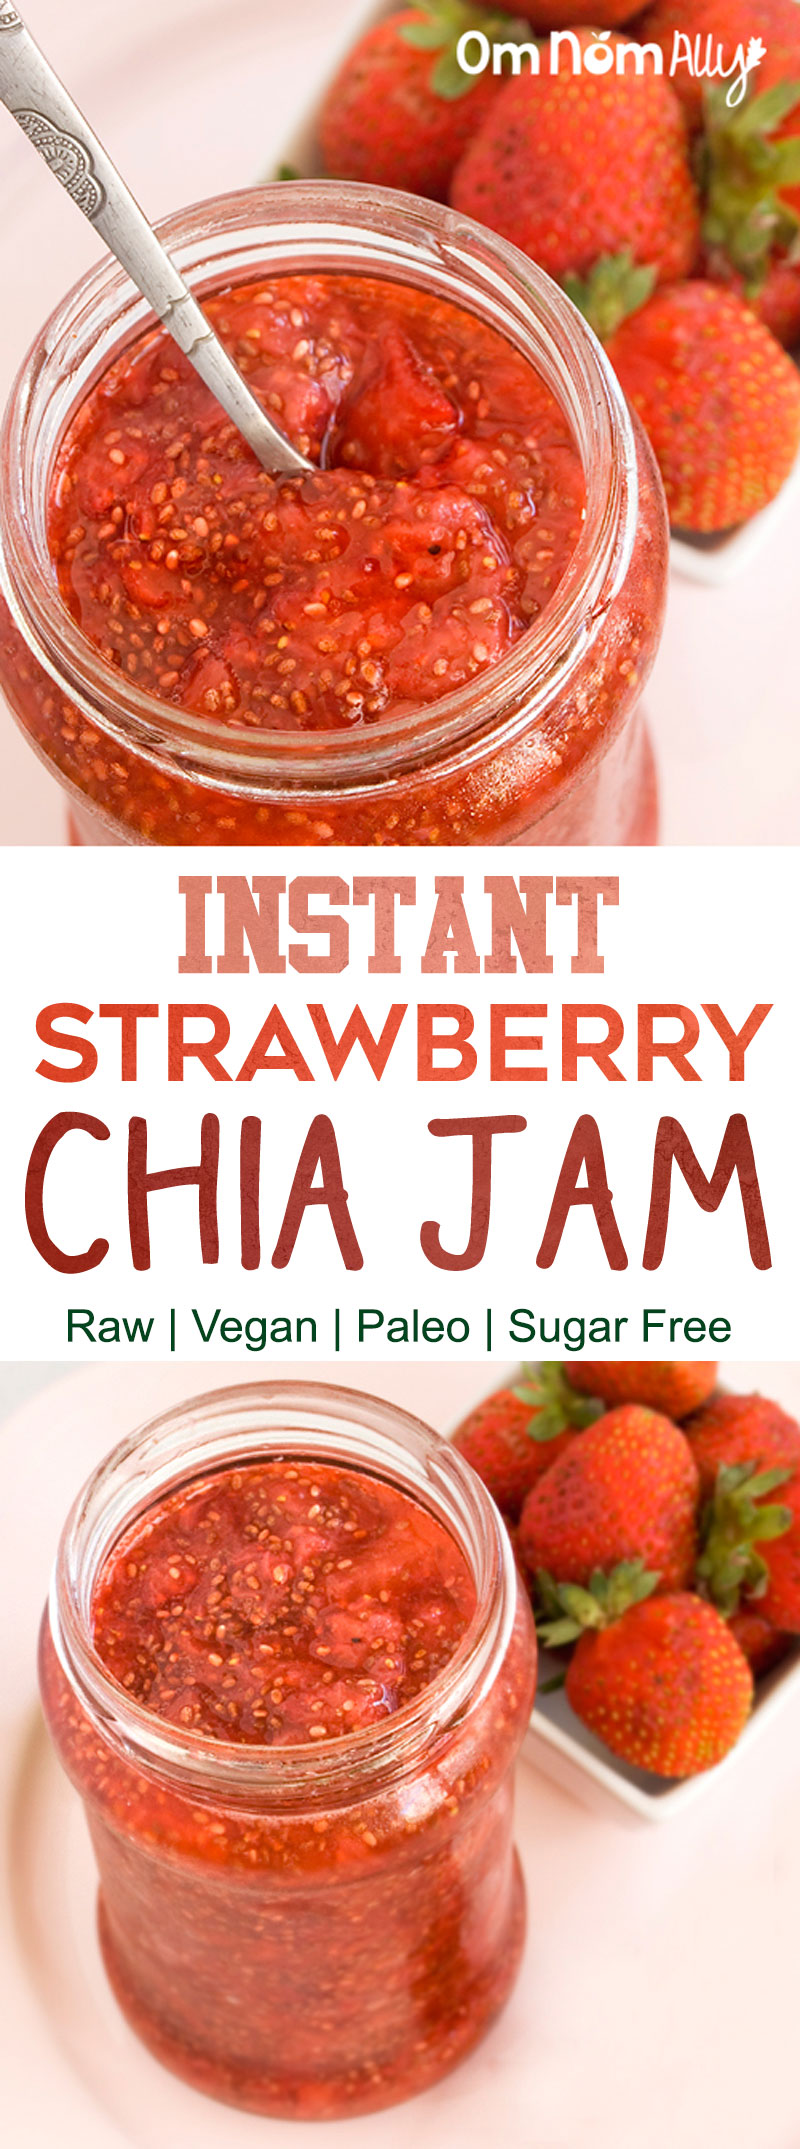 Instant Strawberry Chia Jam - Raw / Vegan / Paleo @OmNomAlly | No canning or cooking required - cheat your way to delicious strawberry (chia) jam!